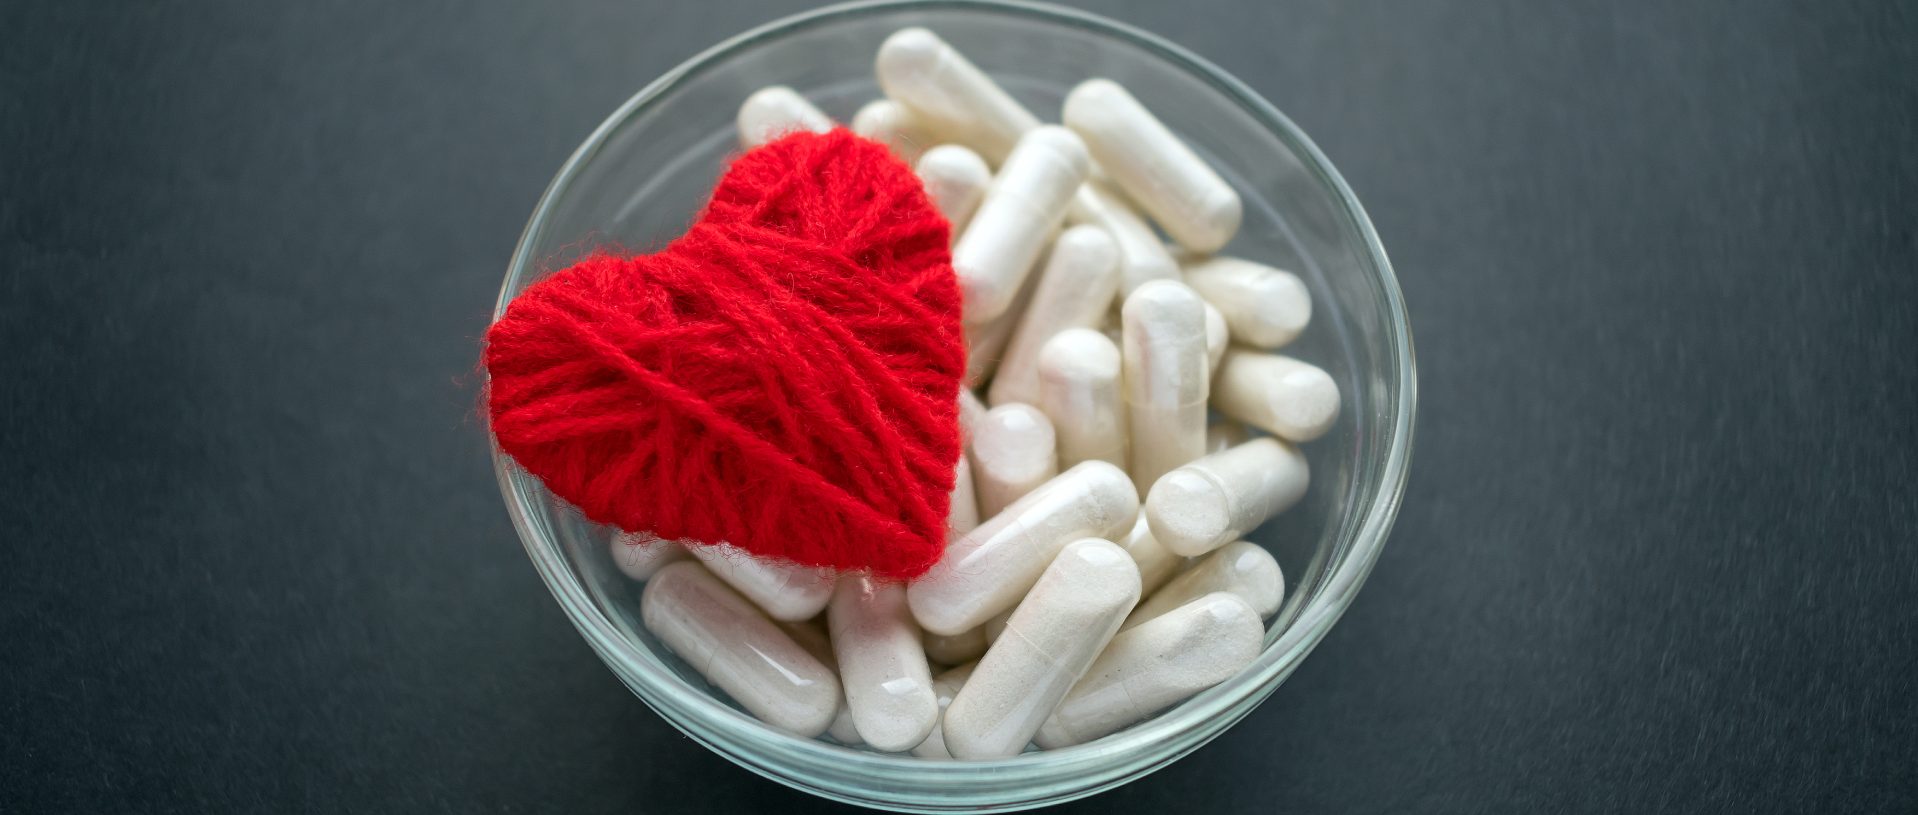 white veg capsules and red thread heart in glass bowl on black background, anticoagulant, blood thinners